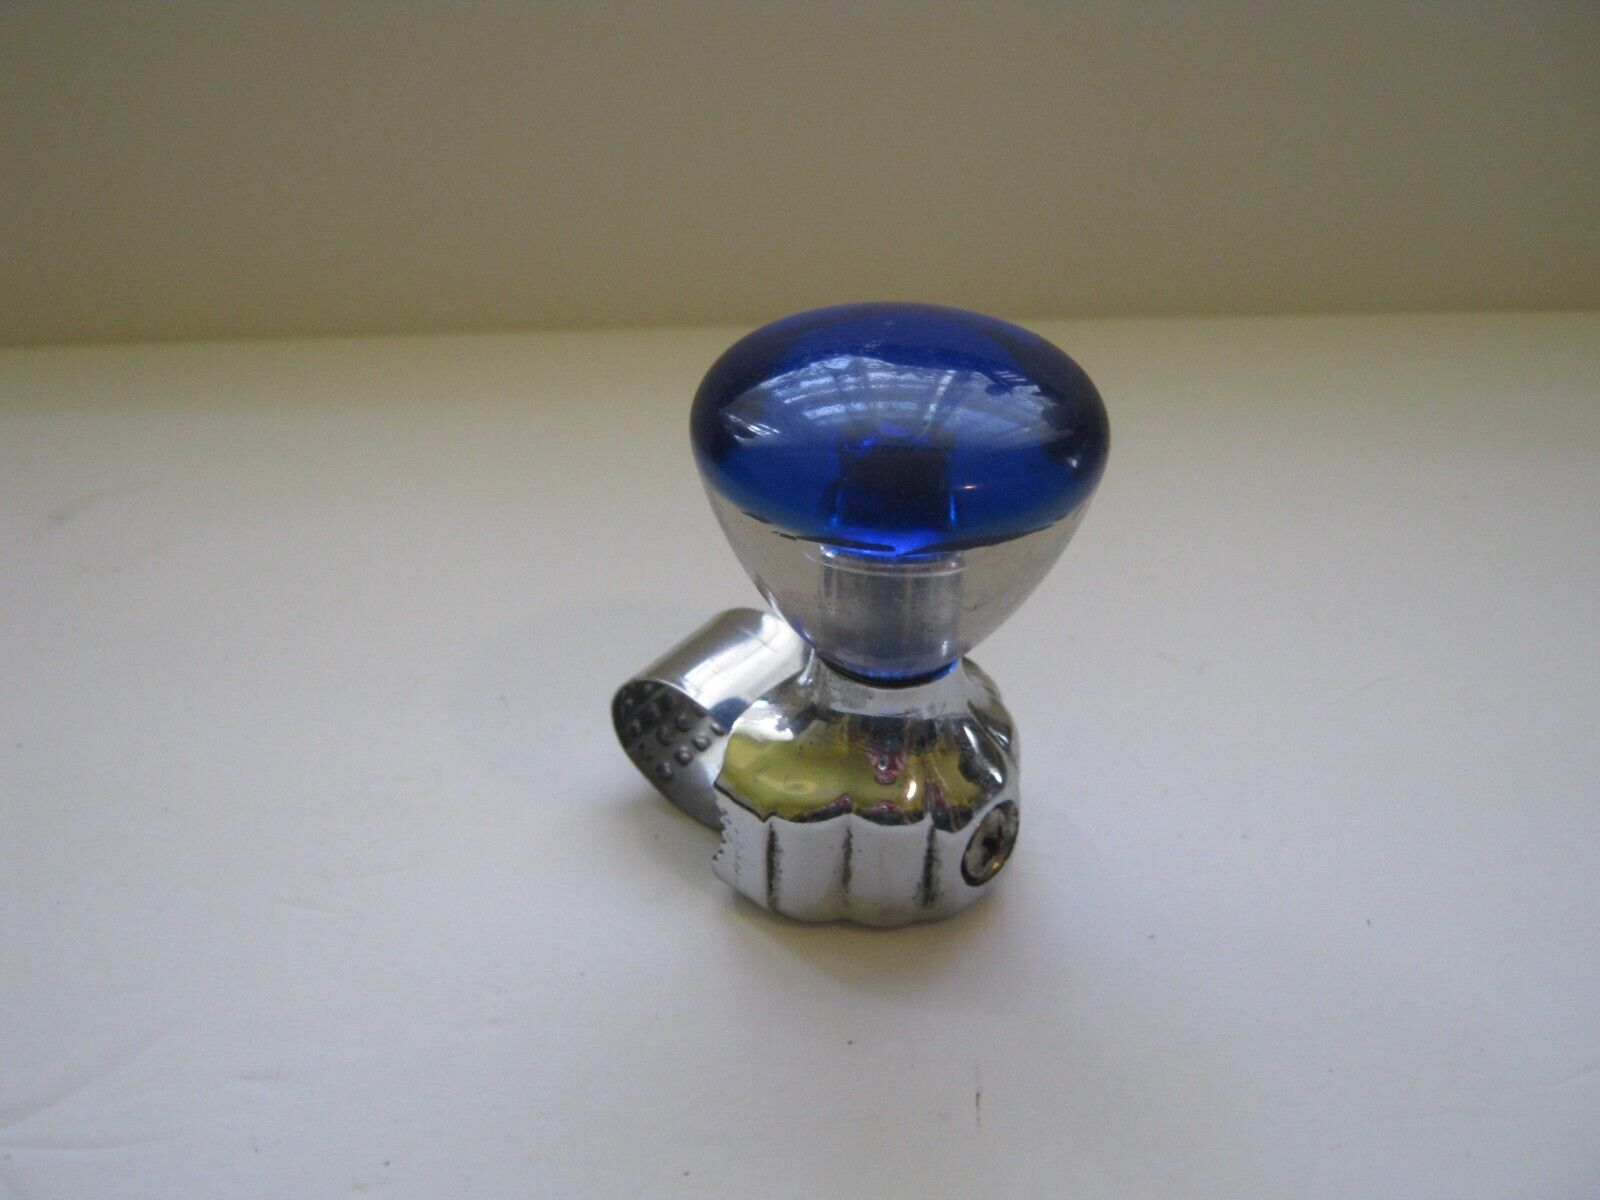 1950s Blue Casco Steering Wheel Spinner Suicide Knob Chevy Ford Dodge Accessory